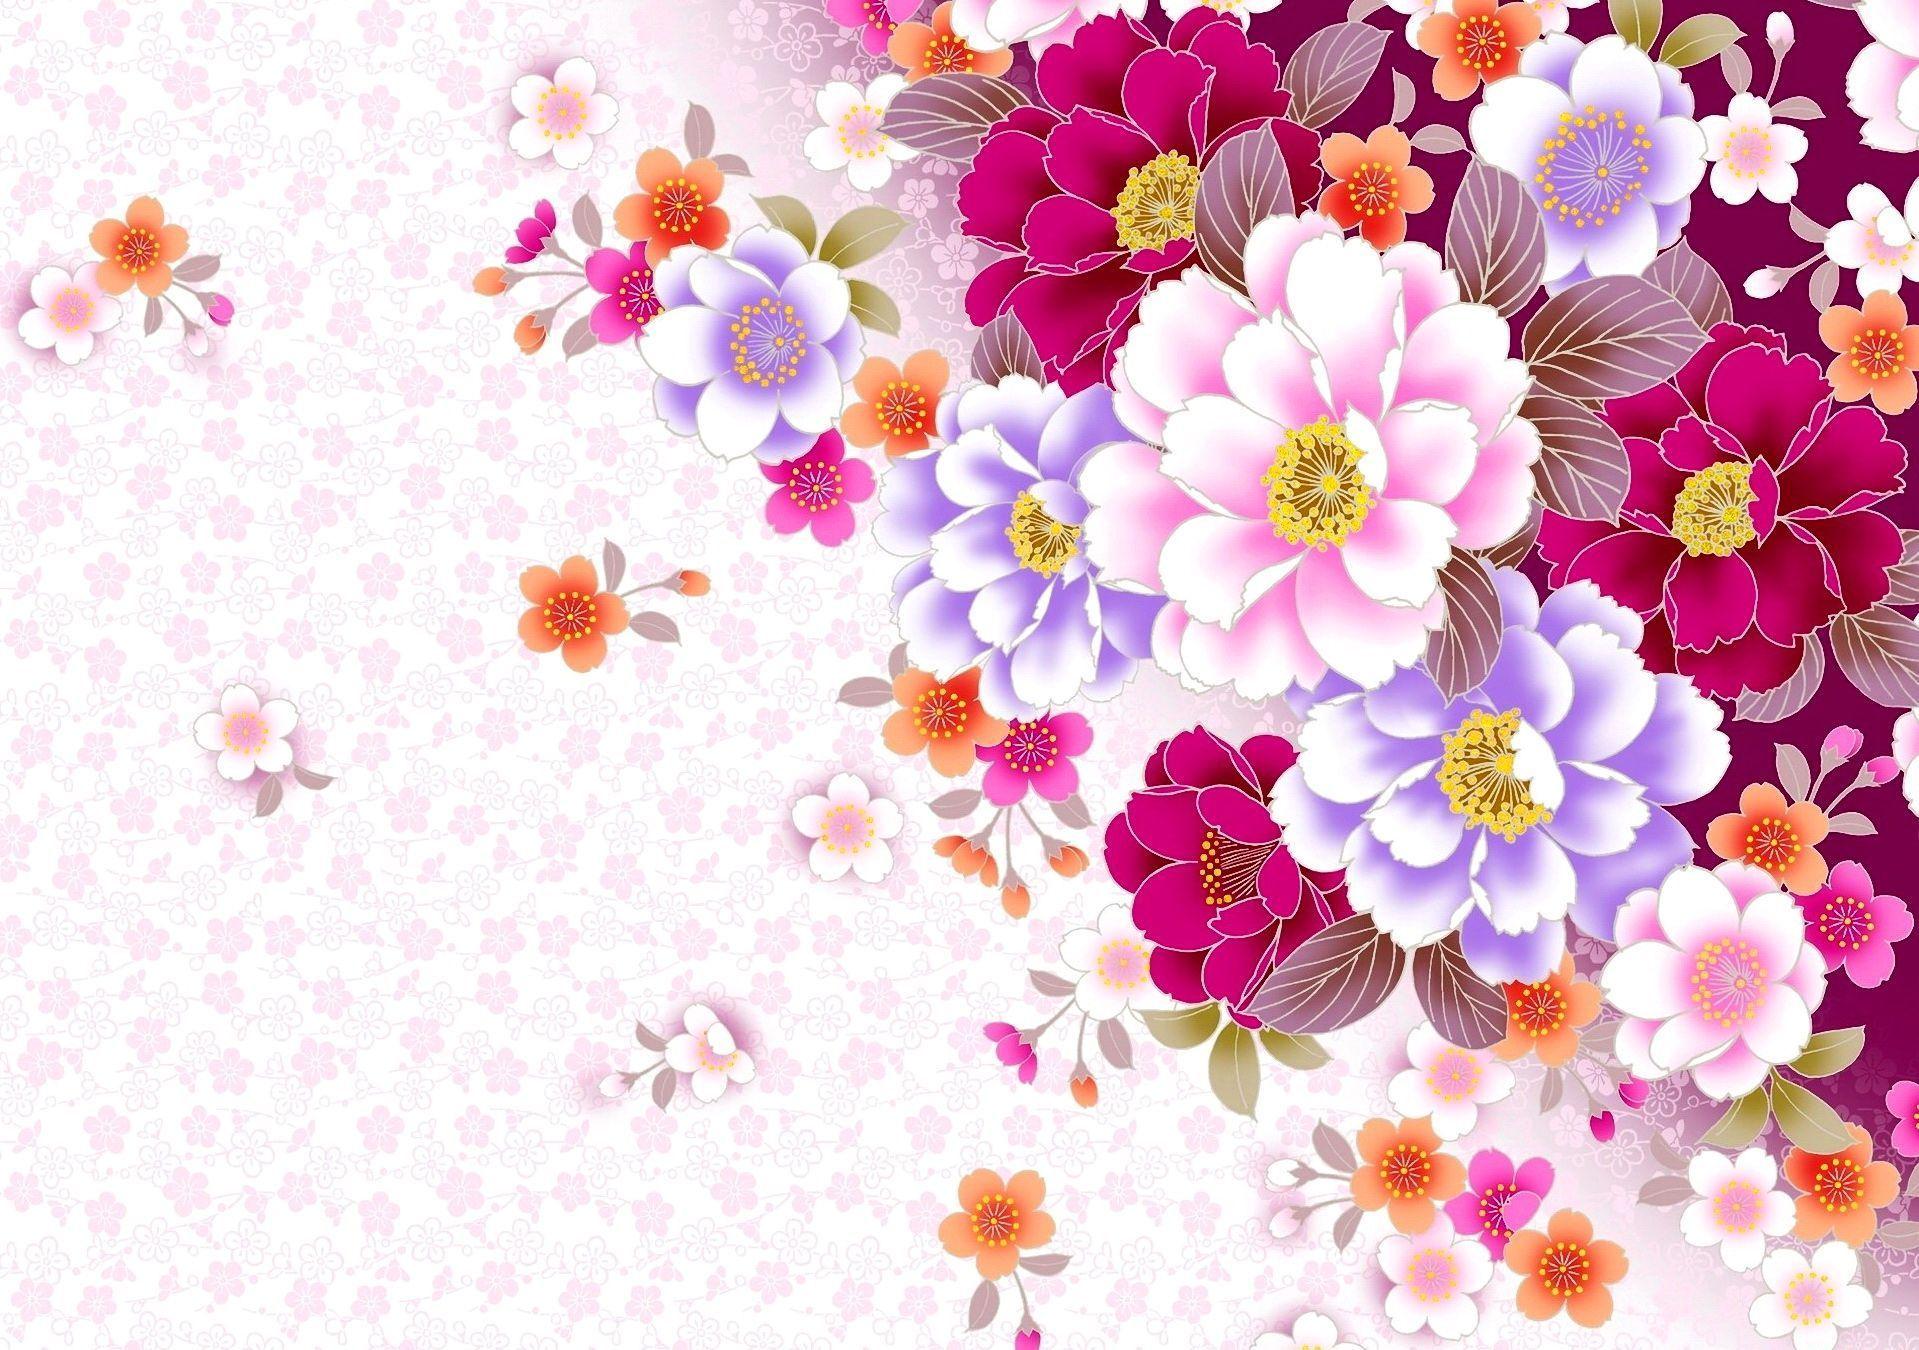 Purple and Pink Floral Watercolor Wallpaper 1919x1350